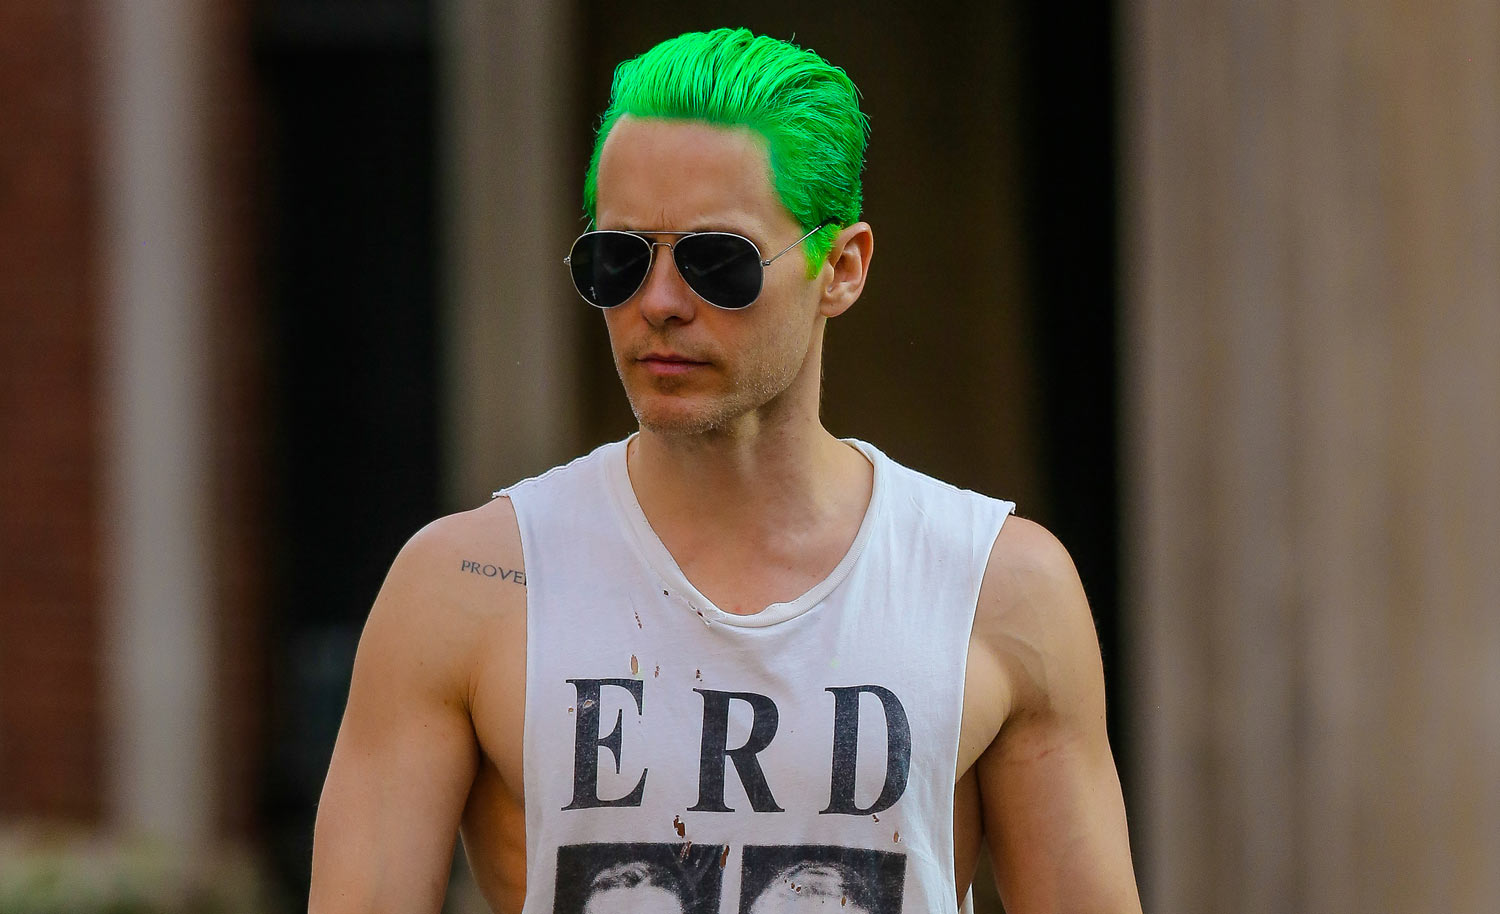 jared-leto-party